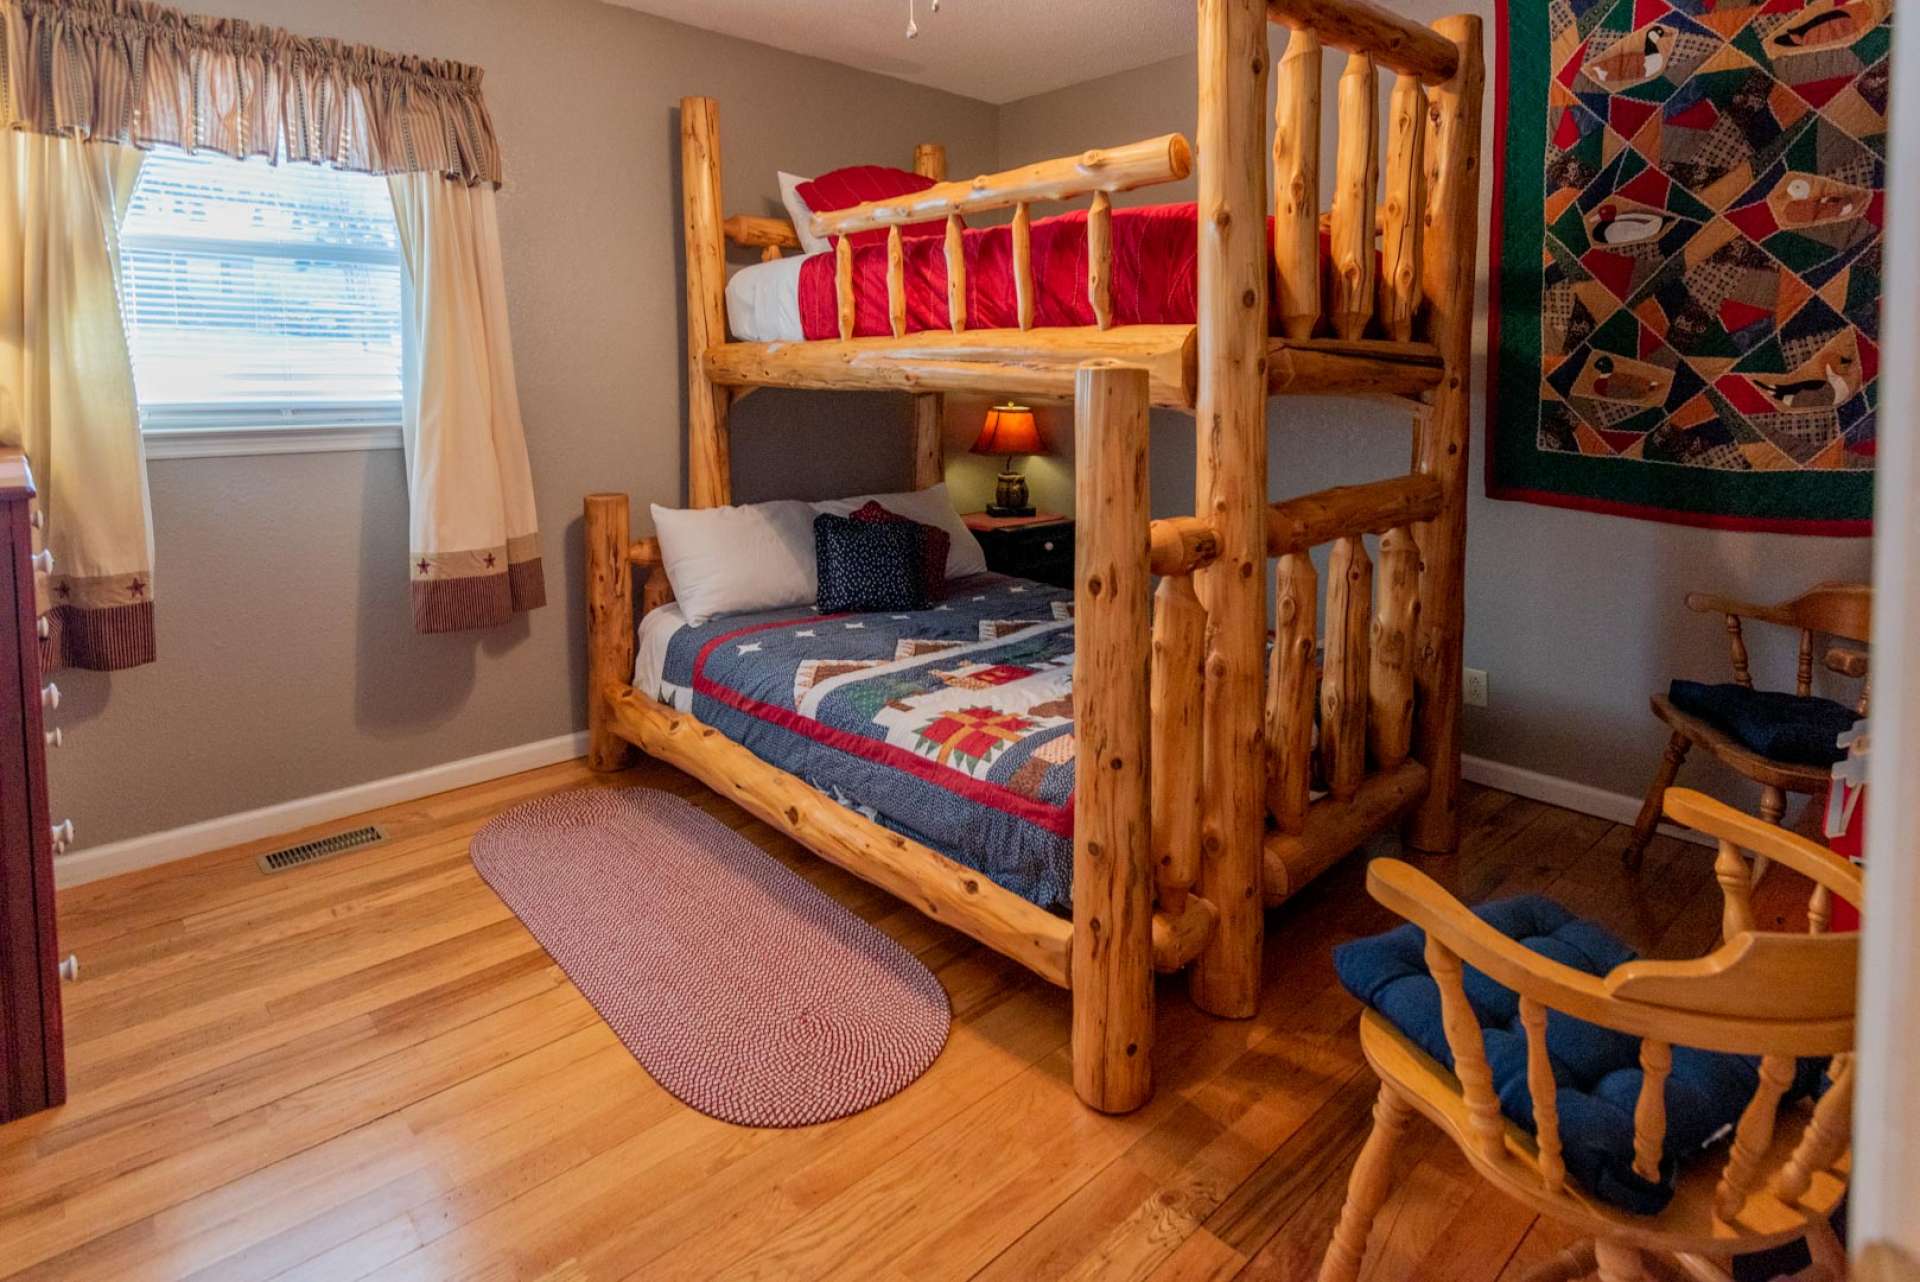 This is the third bedroom.  This home is currently a successful vacation rental.